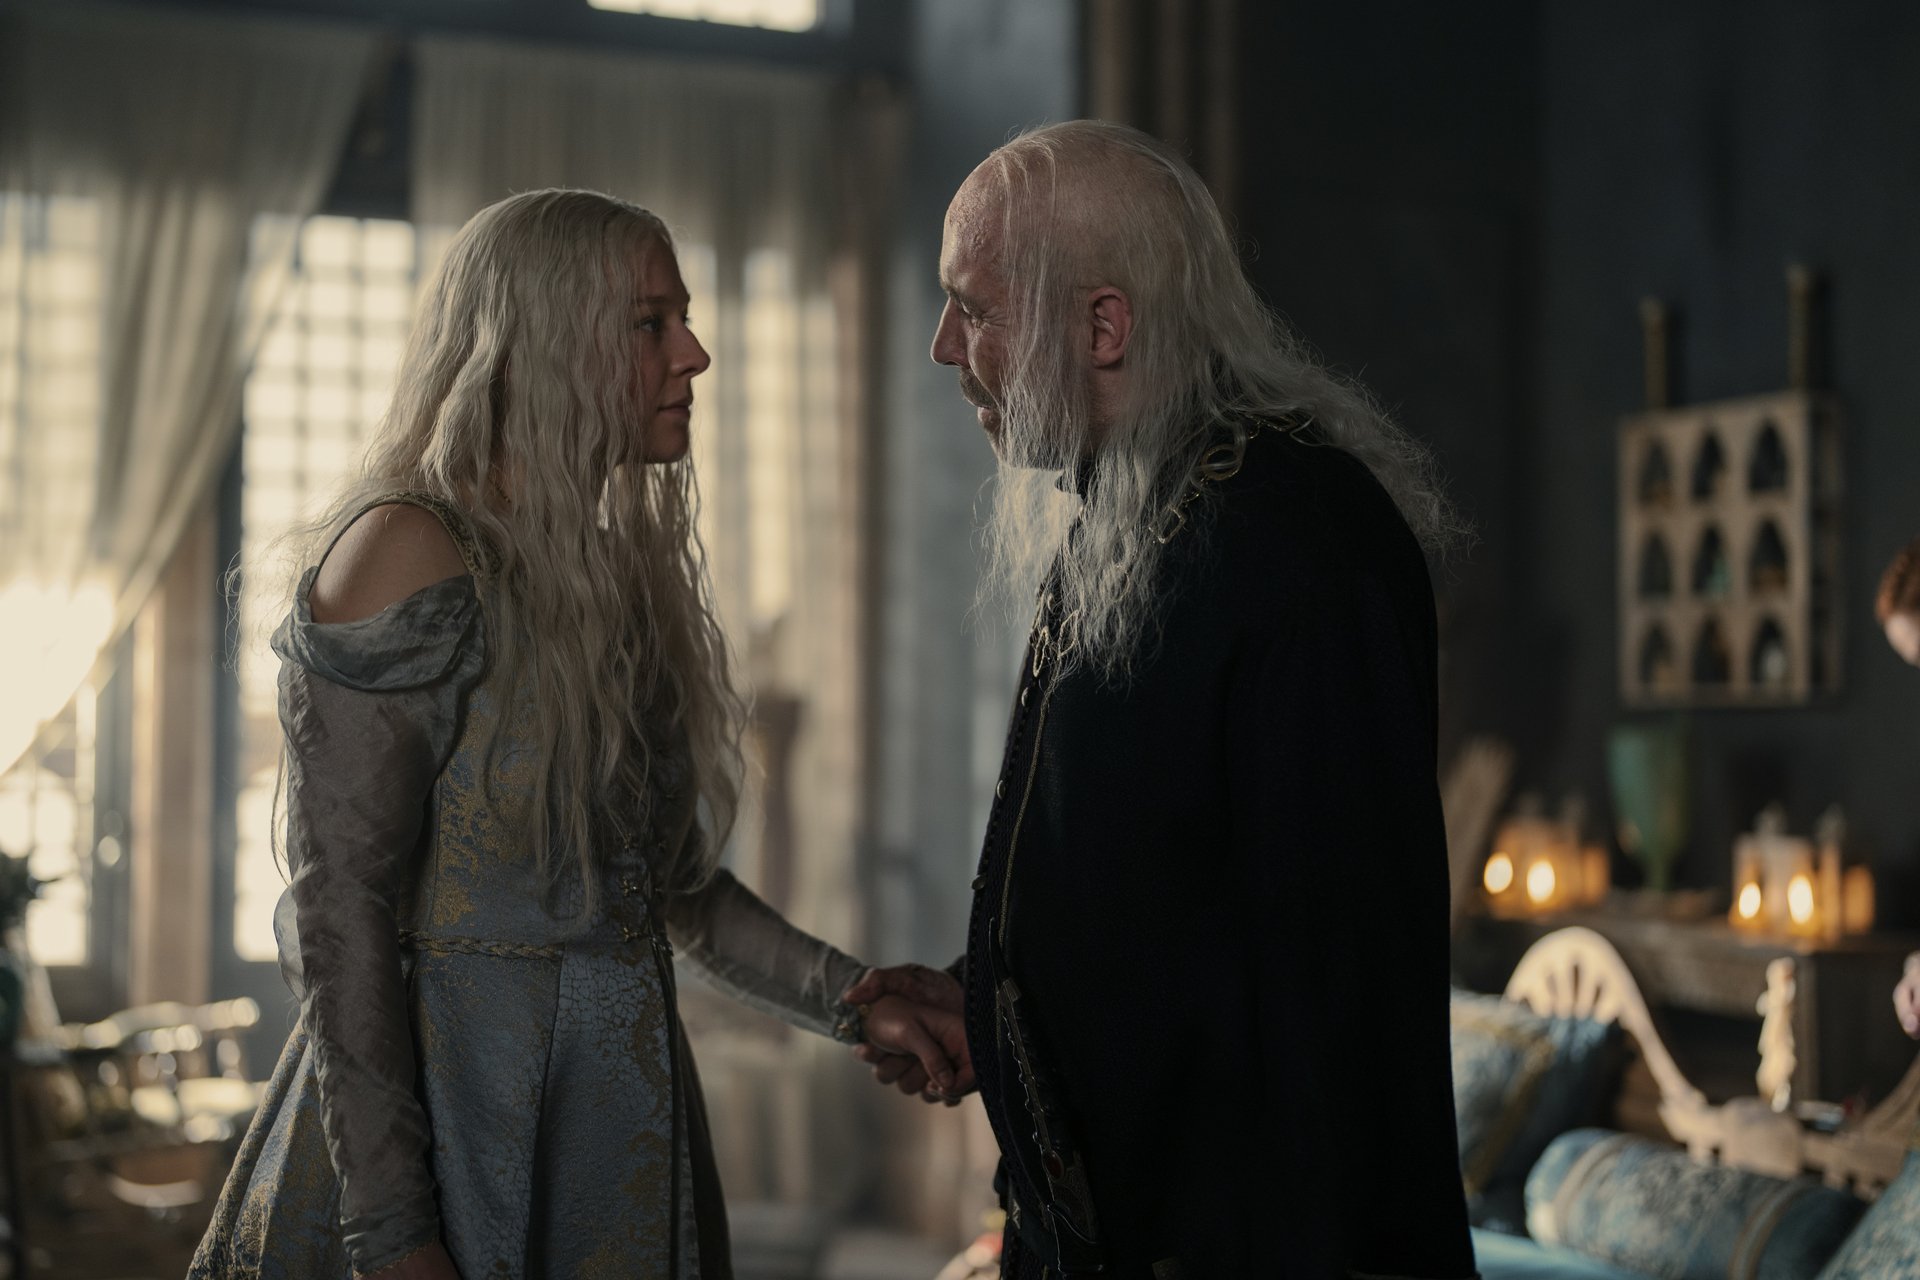 Thaenyra Targaryen (Emma D'Arcy) and Viserys (Paddy Considine) in 'House of the Dragon' Episode 6, which features a significant time jump